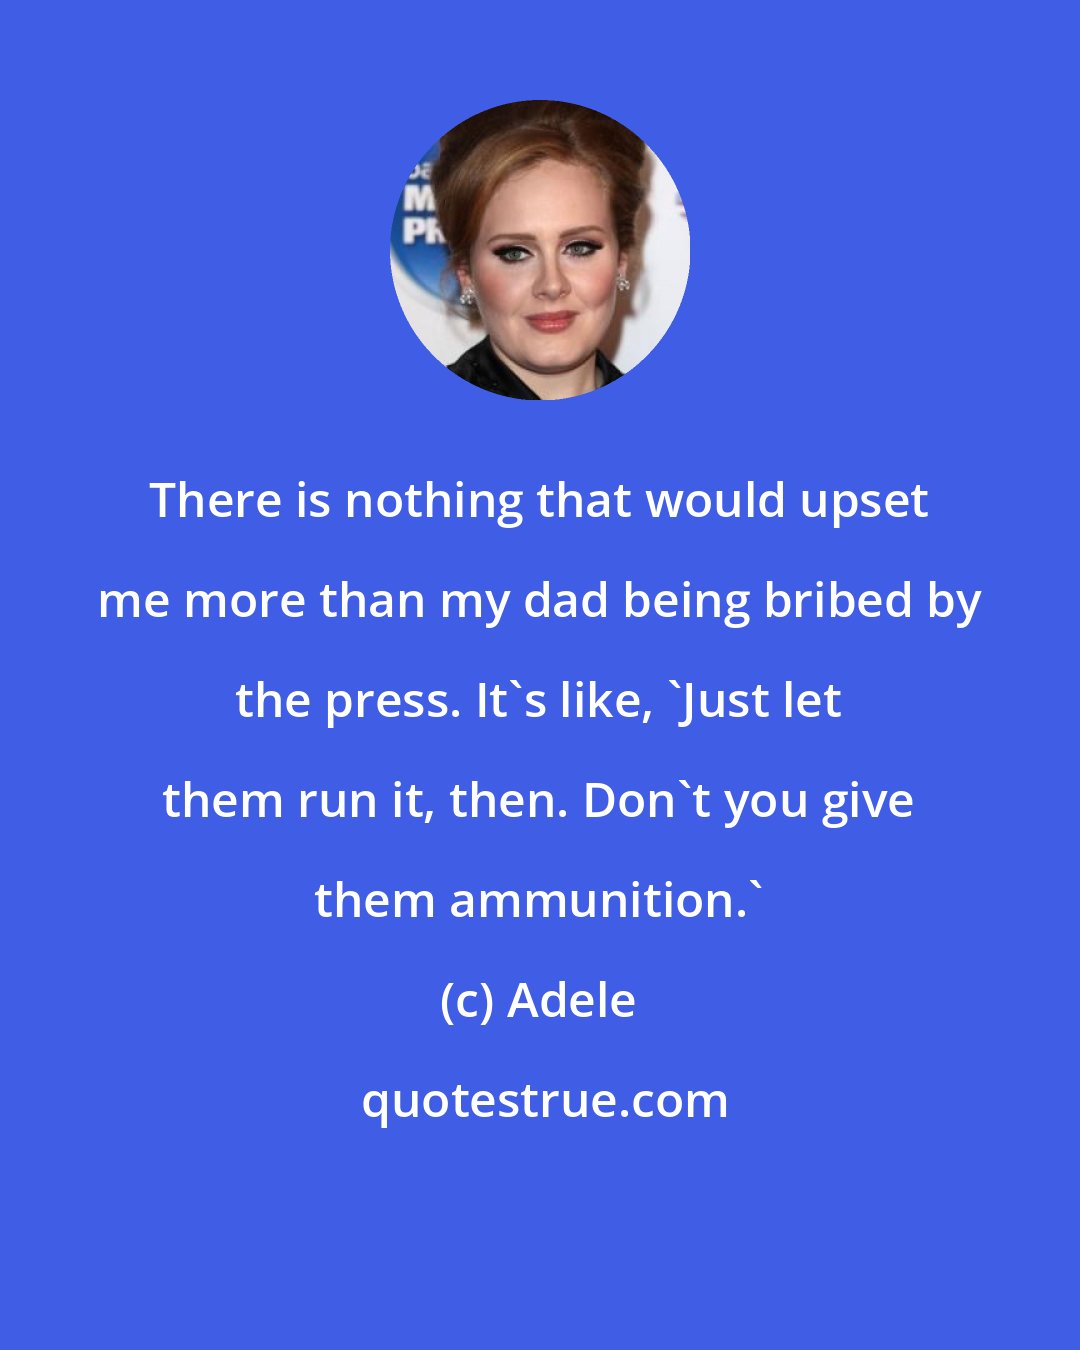 Adele: There is nothing that would upset me more than my dad being bribed by the press. It's like, 'Just let them run it, then. Don't you give them ammunition.'